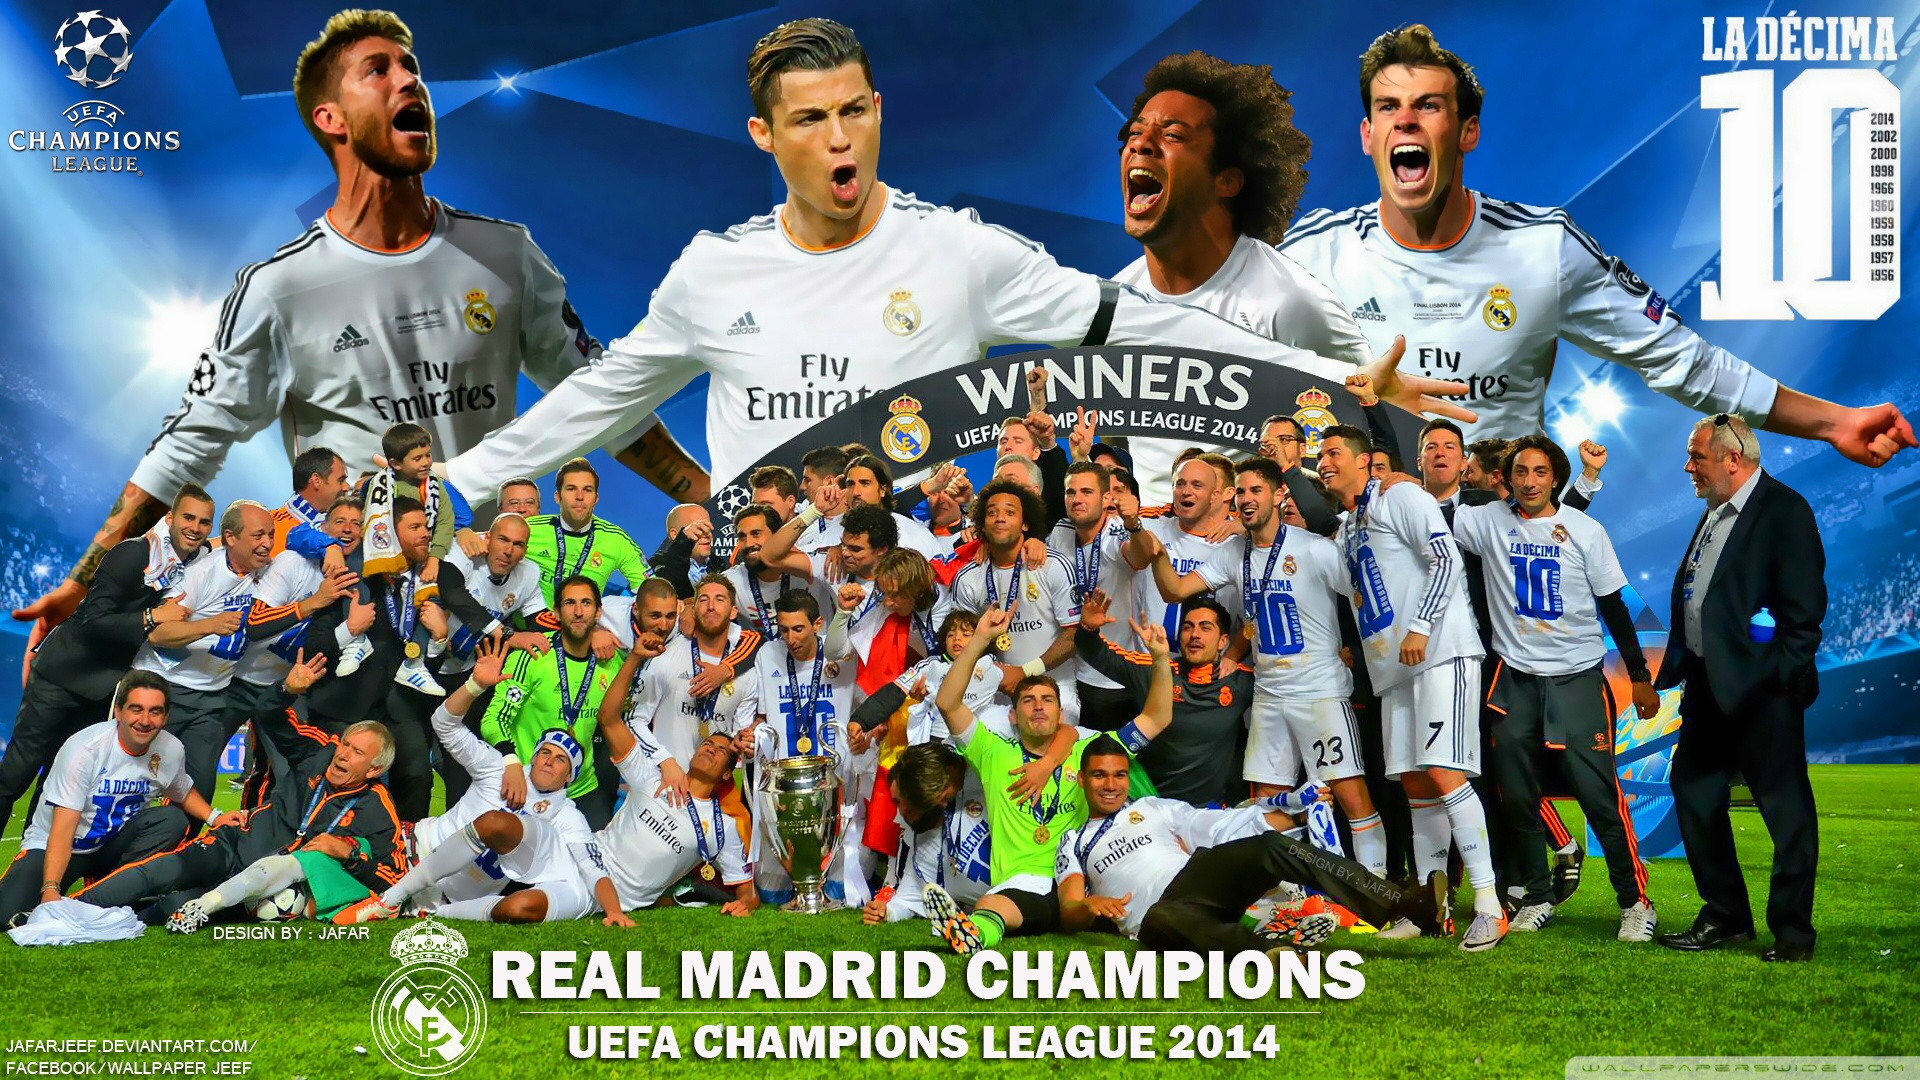 New Real Madrid Winners Champions League Wallpaper Background